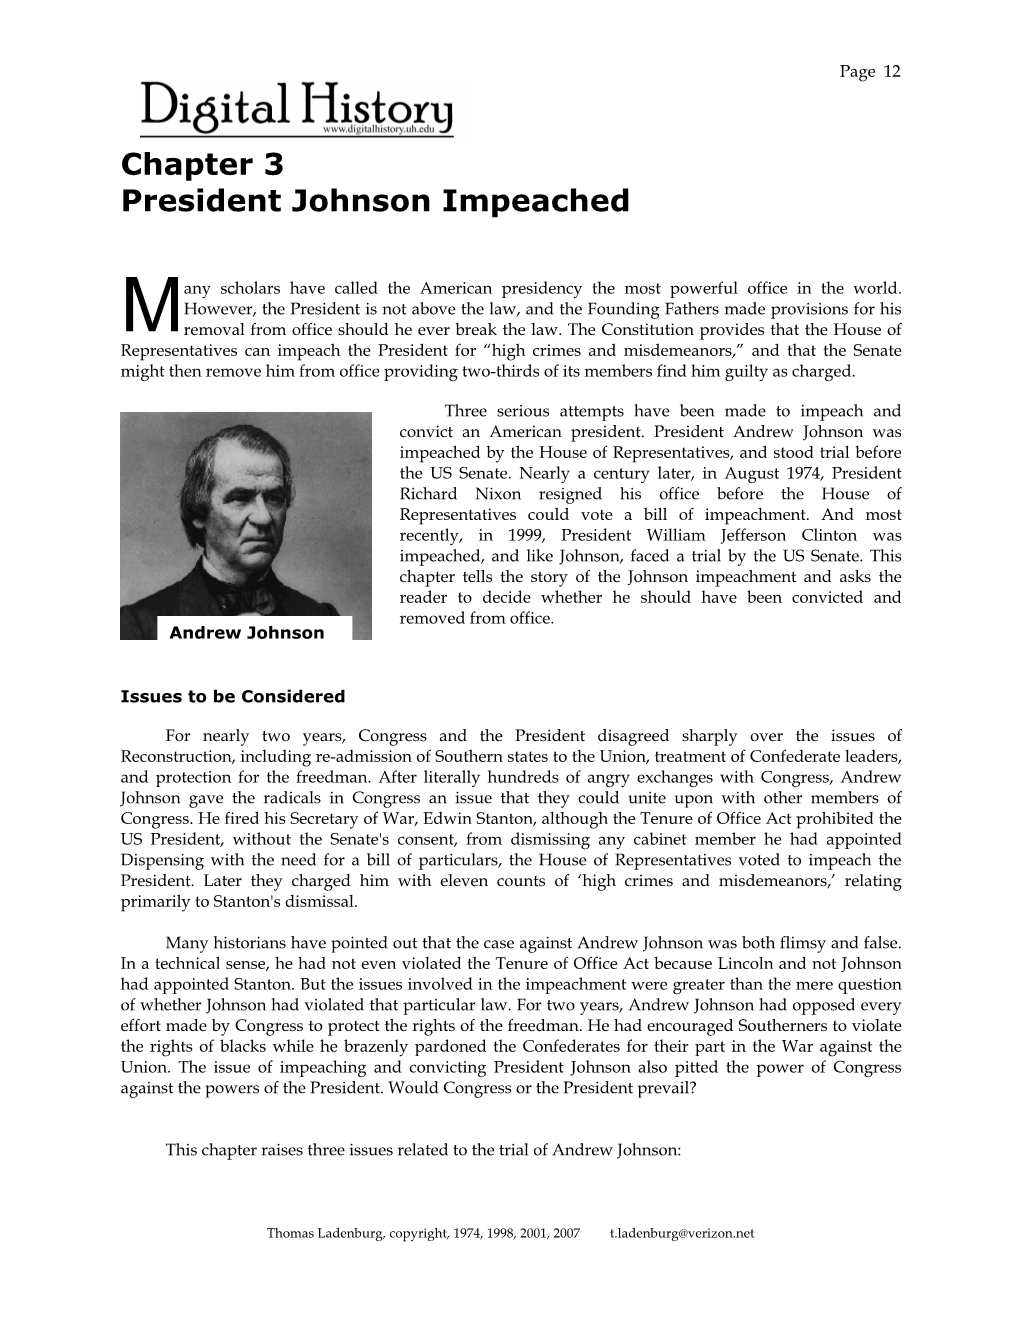 Chapter 3 President Johnson Impeached